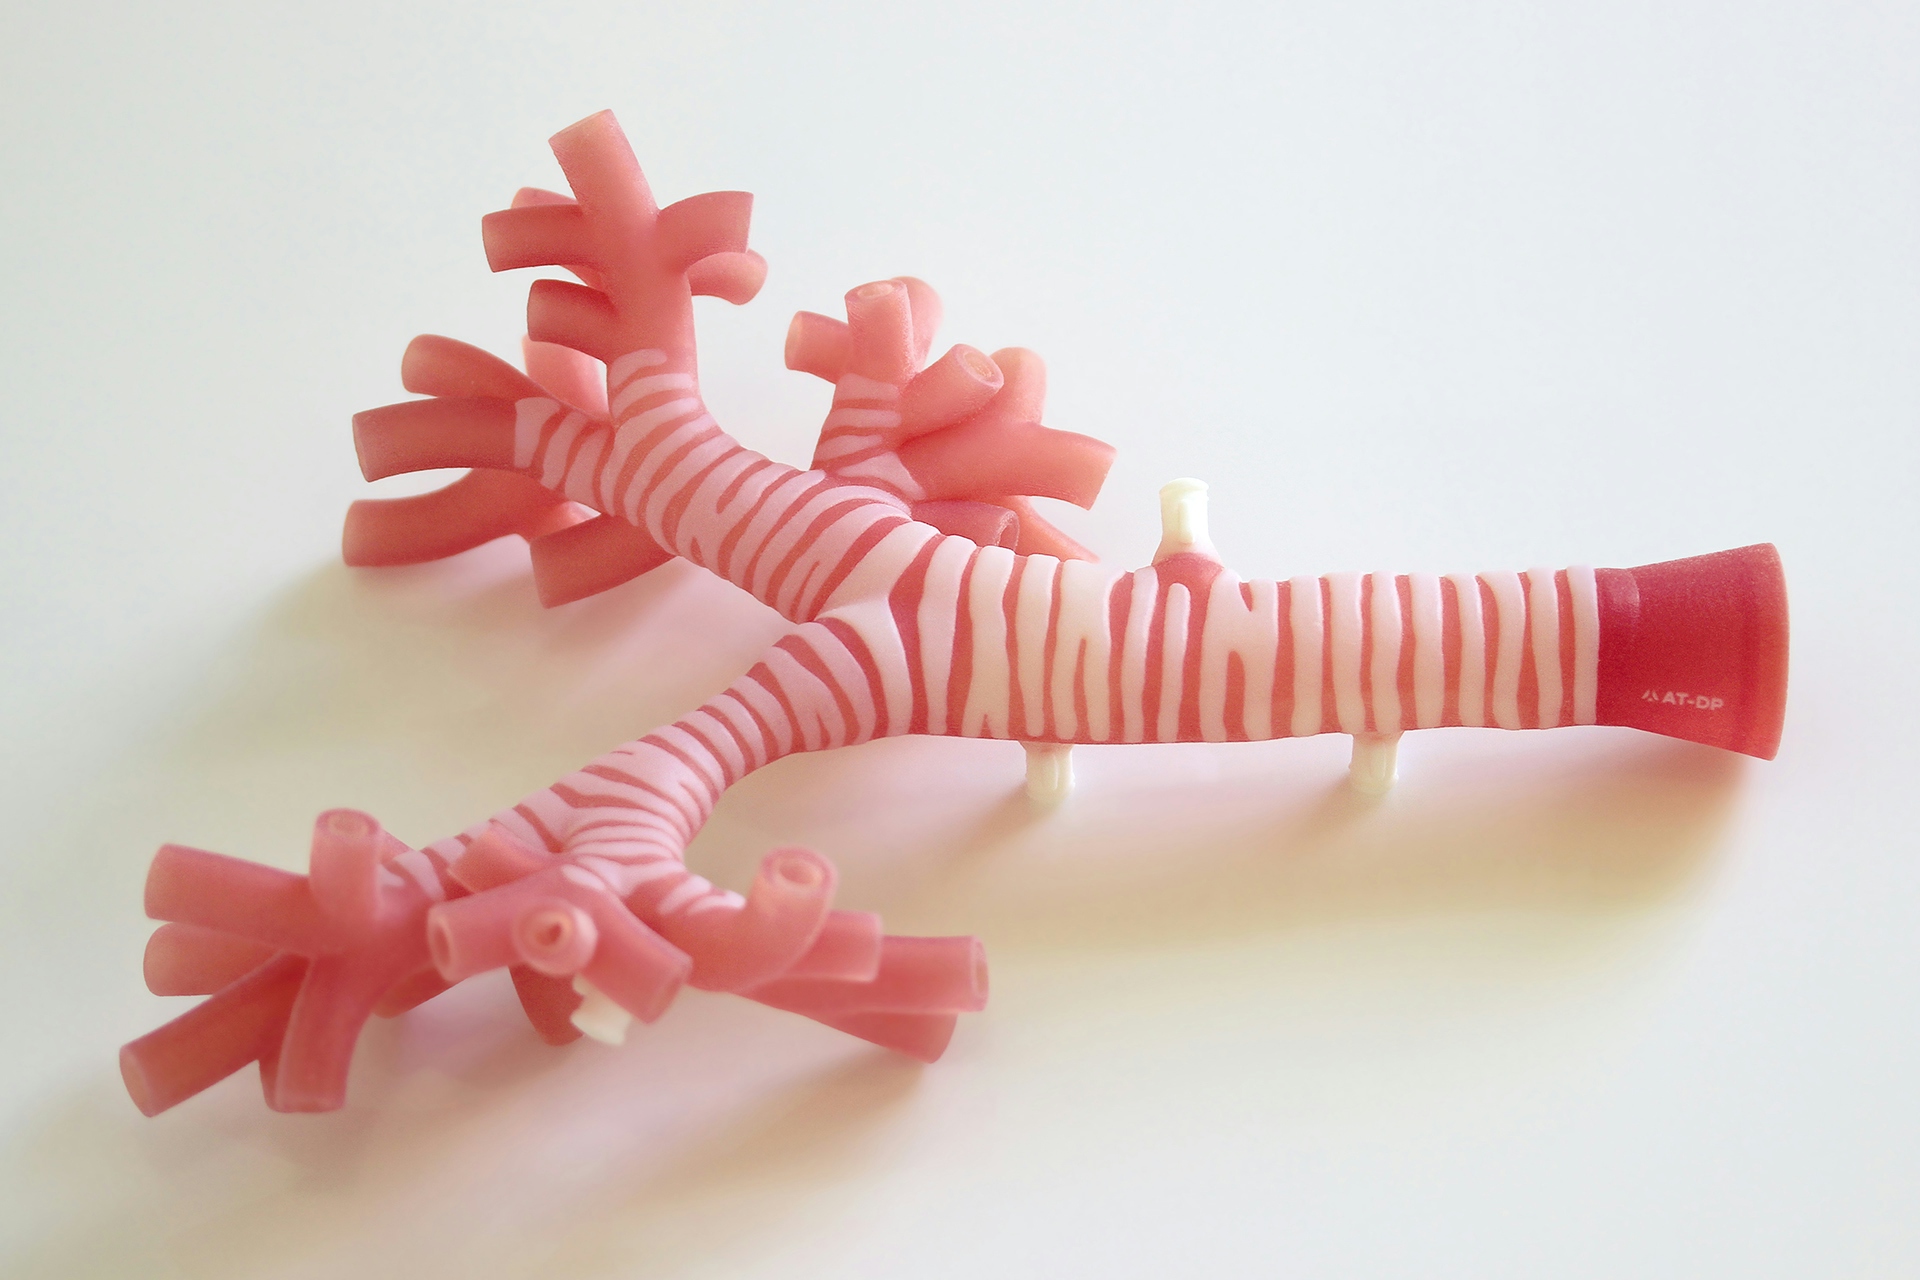 Side view of 3D printed trachea.